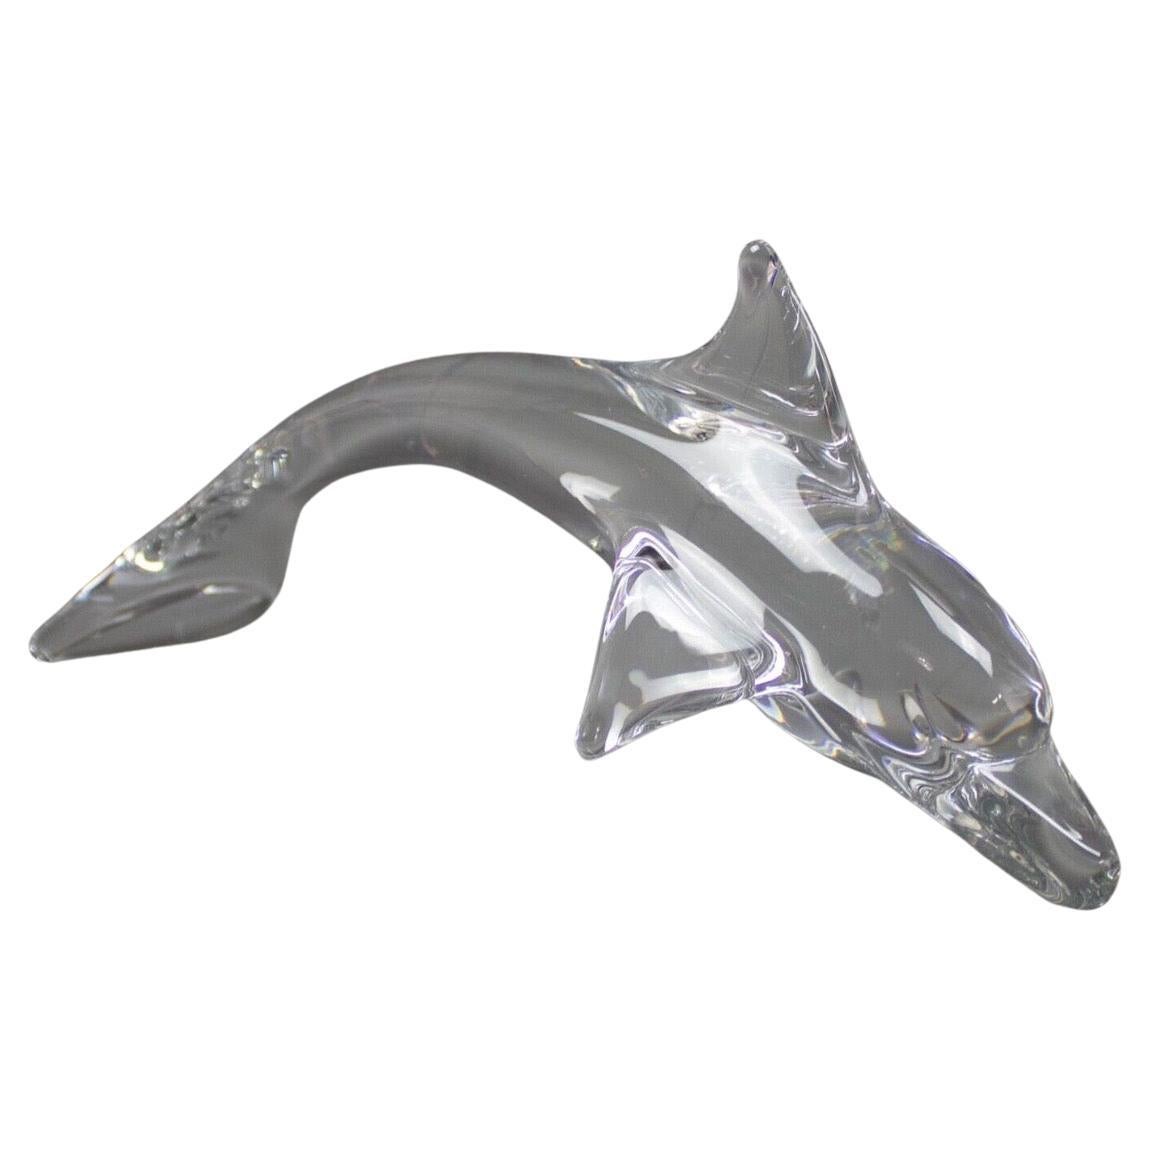 Beautiful clear crystal art glass dolphin sculpture by Daum of France, circa 1980s. The piece is in very good vintage condition with no chips or cracks and measures 13